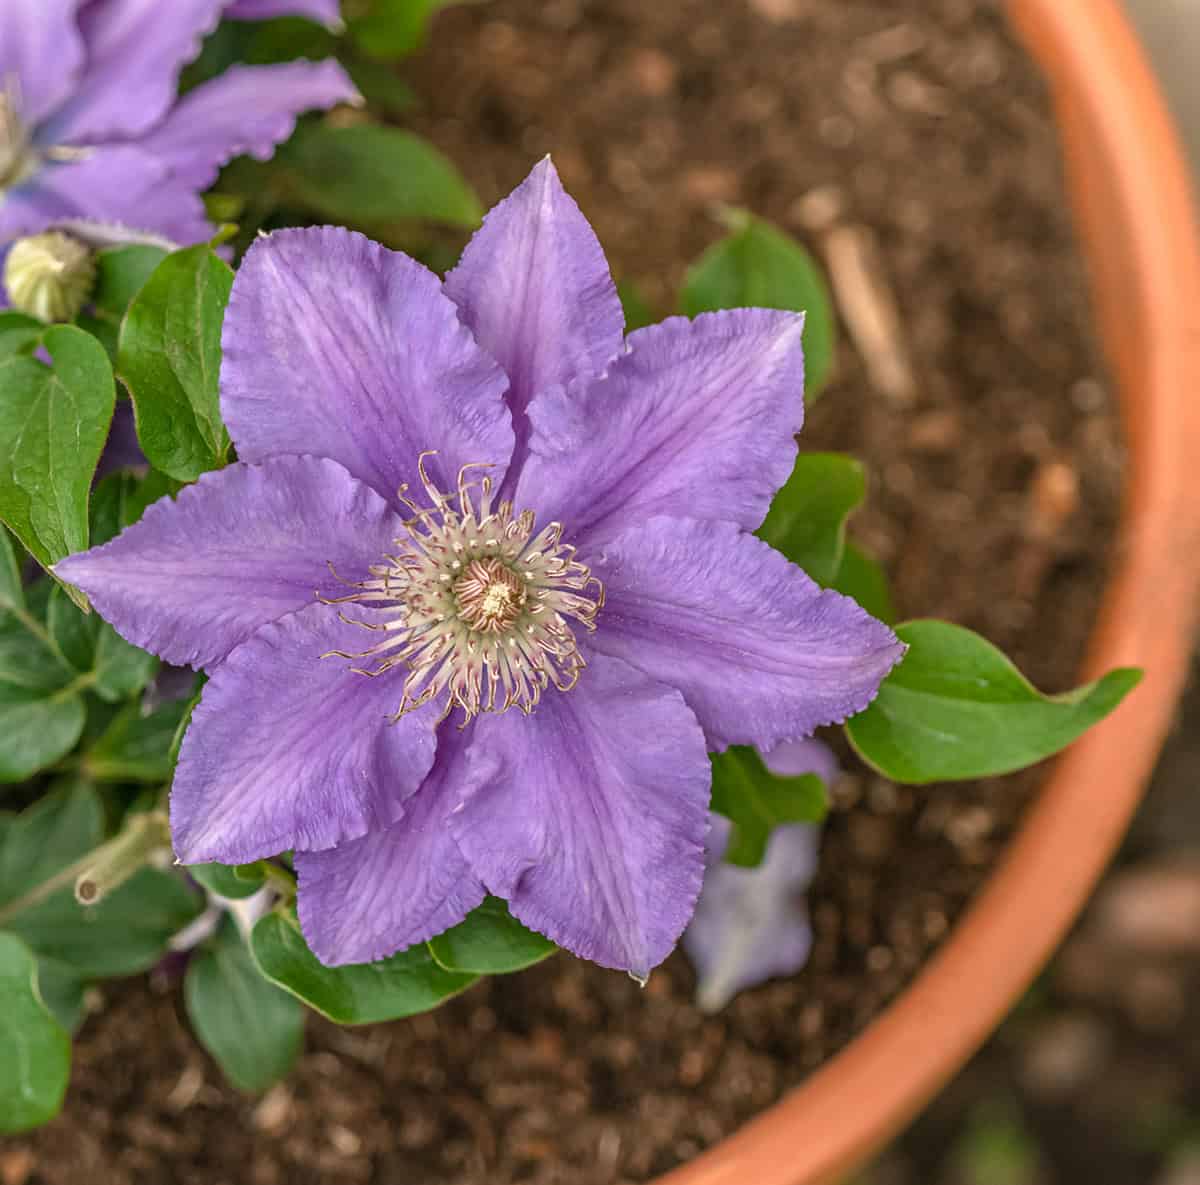 Potting and Repotting Clematis Vine